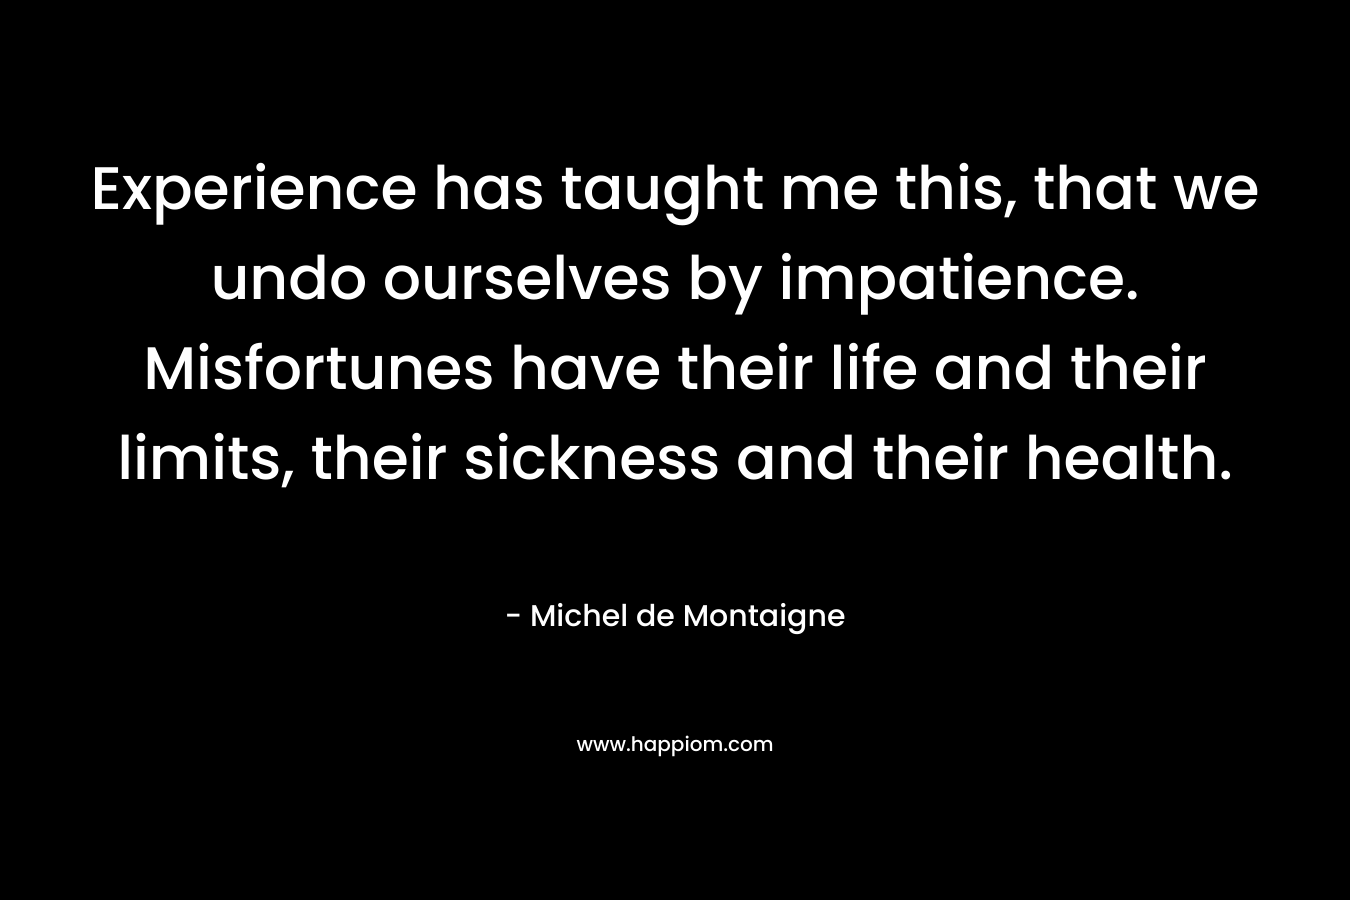 Experience has taught me this, that we undo ourselves by impatience. Misfortunes have their life and their limits, their sickness and their health. – Michel de Montaigne